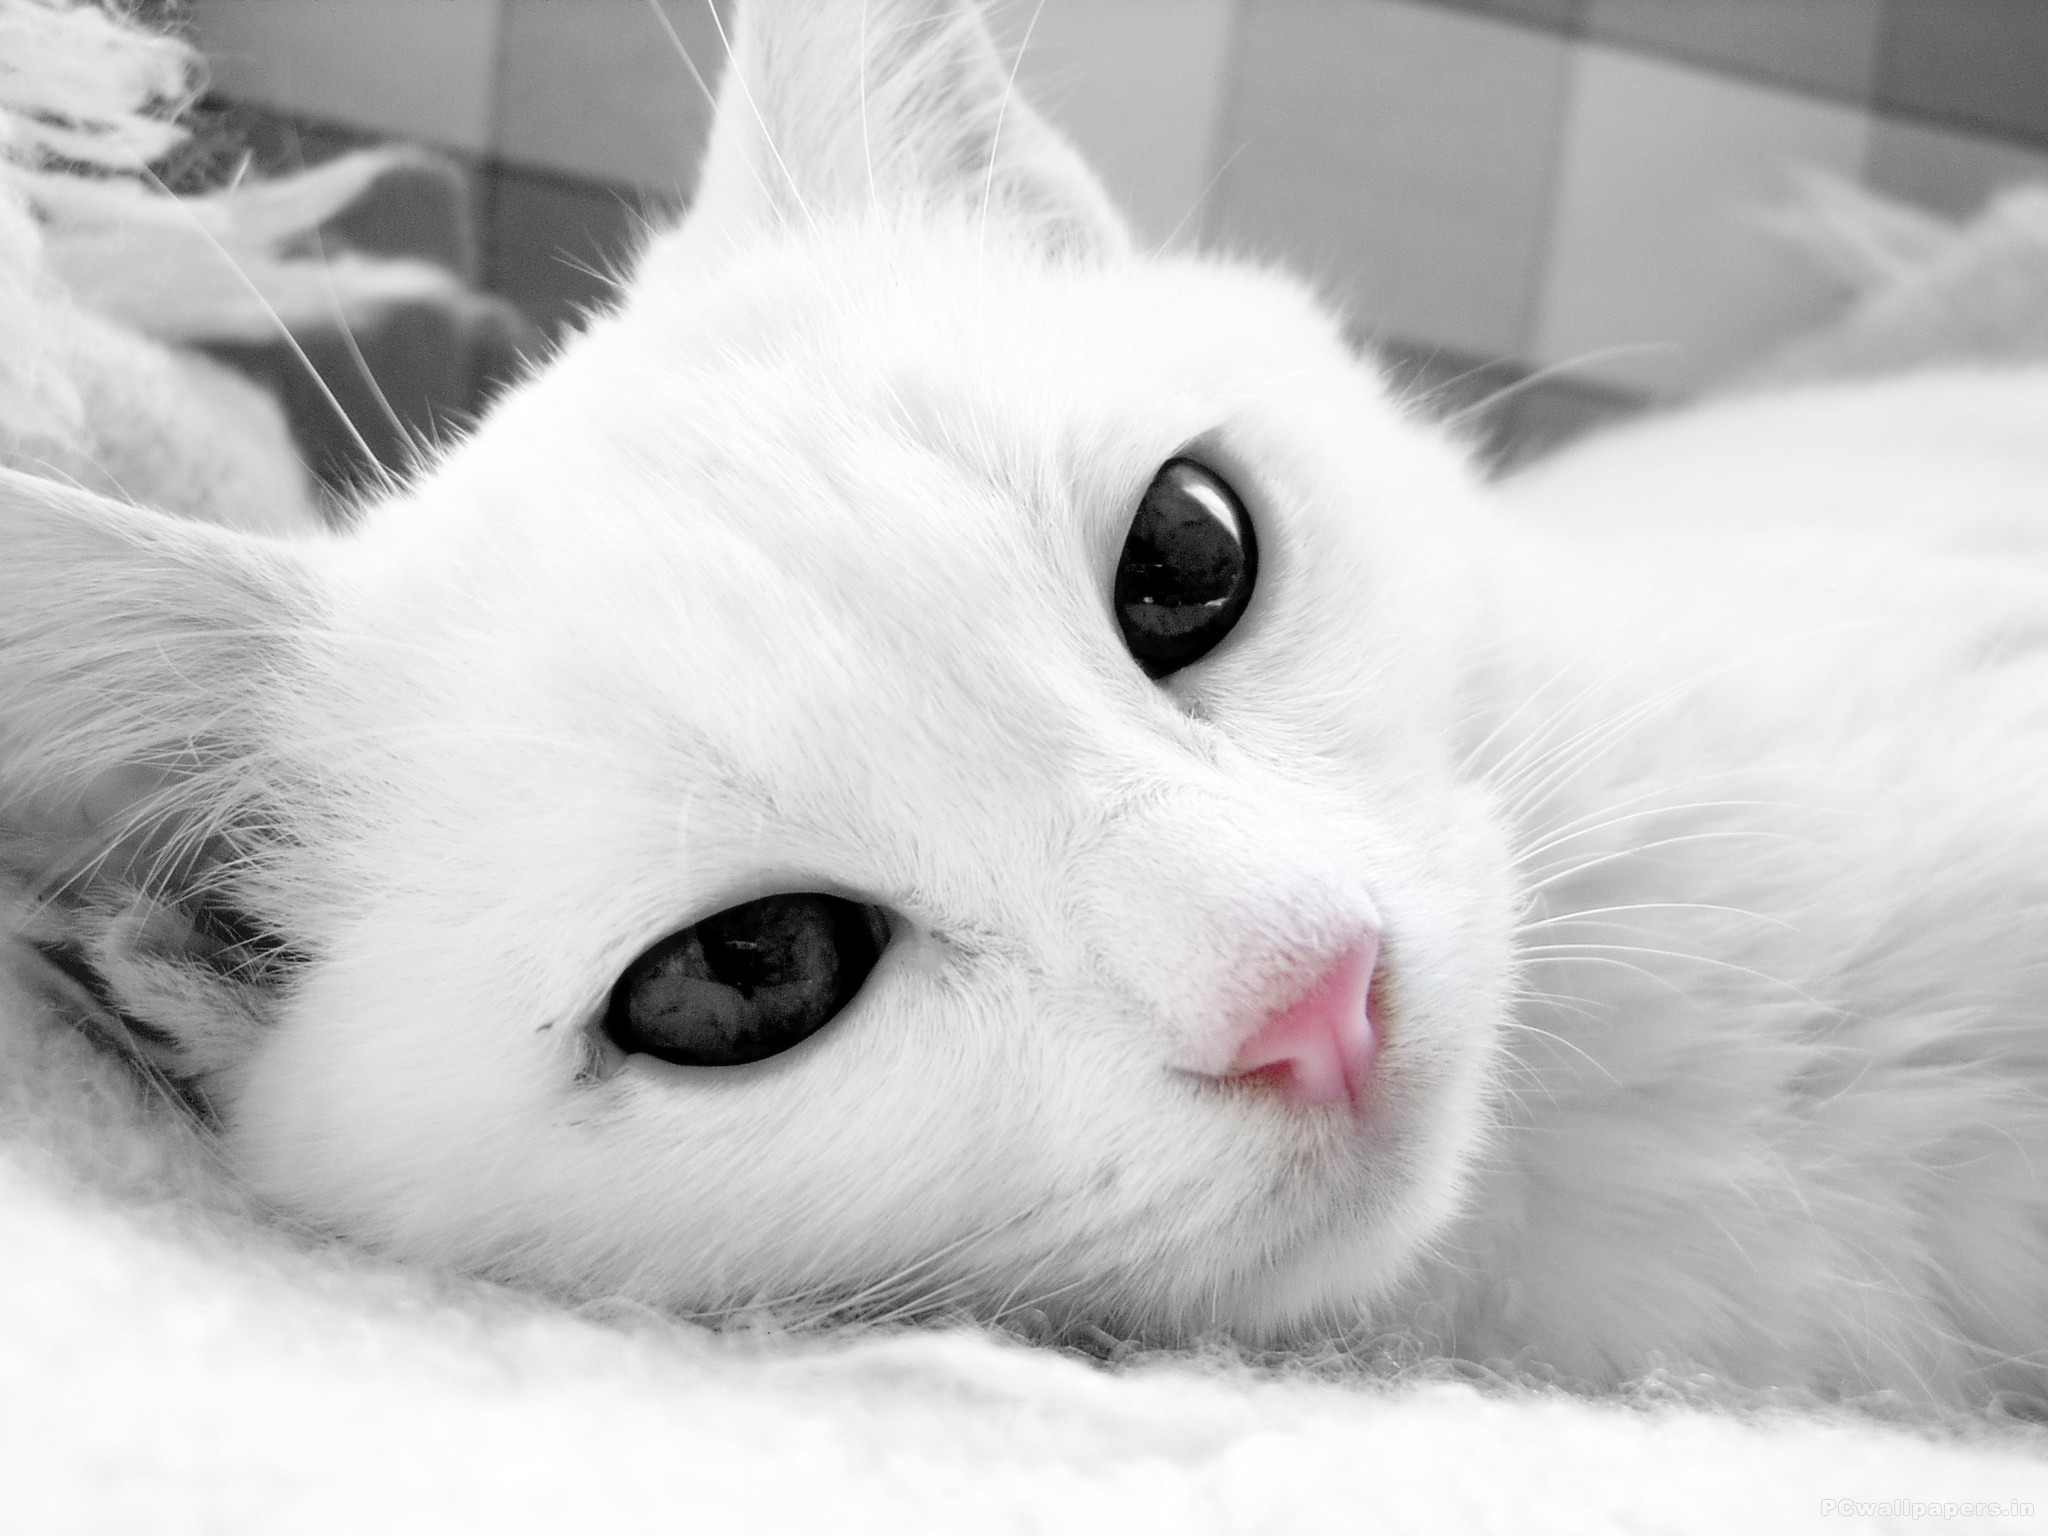 White Cat With Dark Eyes Close Up Wallpaper And Image